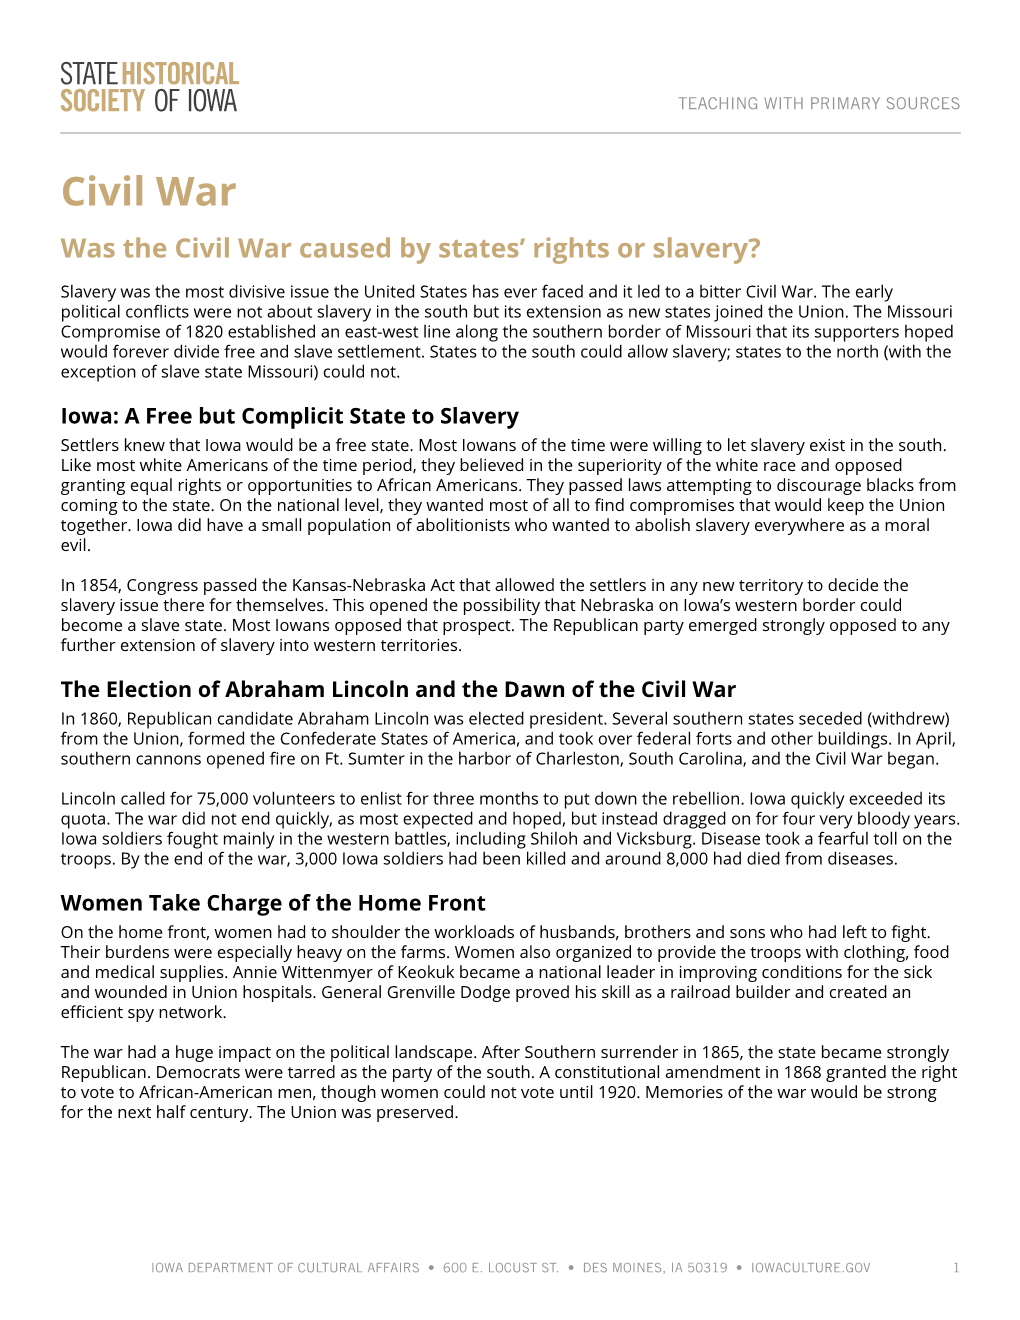 Civil War Was the Civil War Caused by States’ Rights Or Slavery?